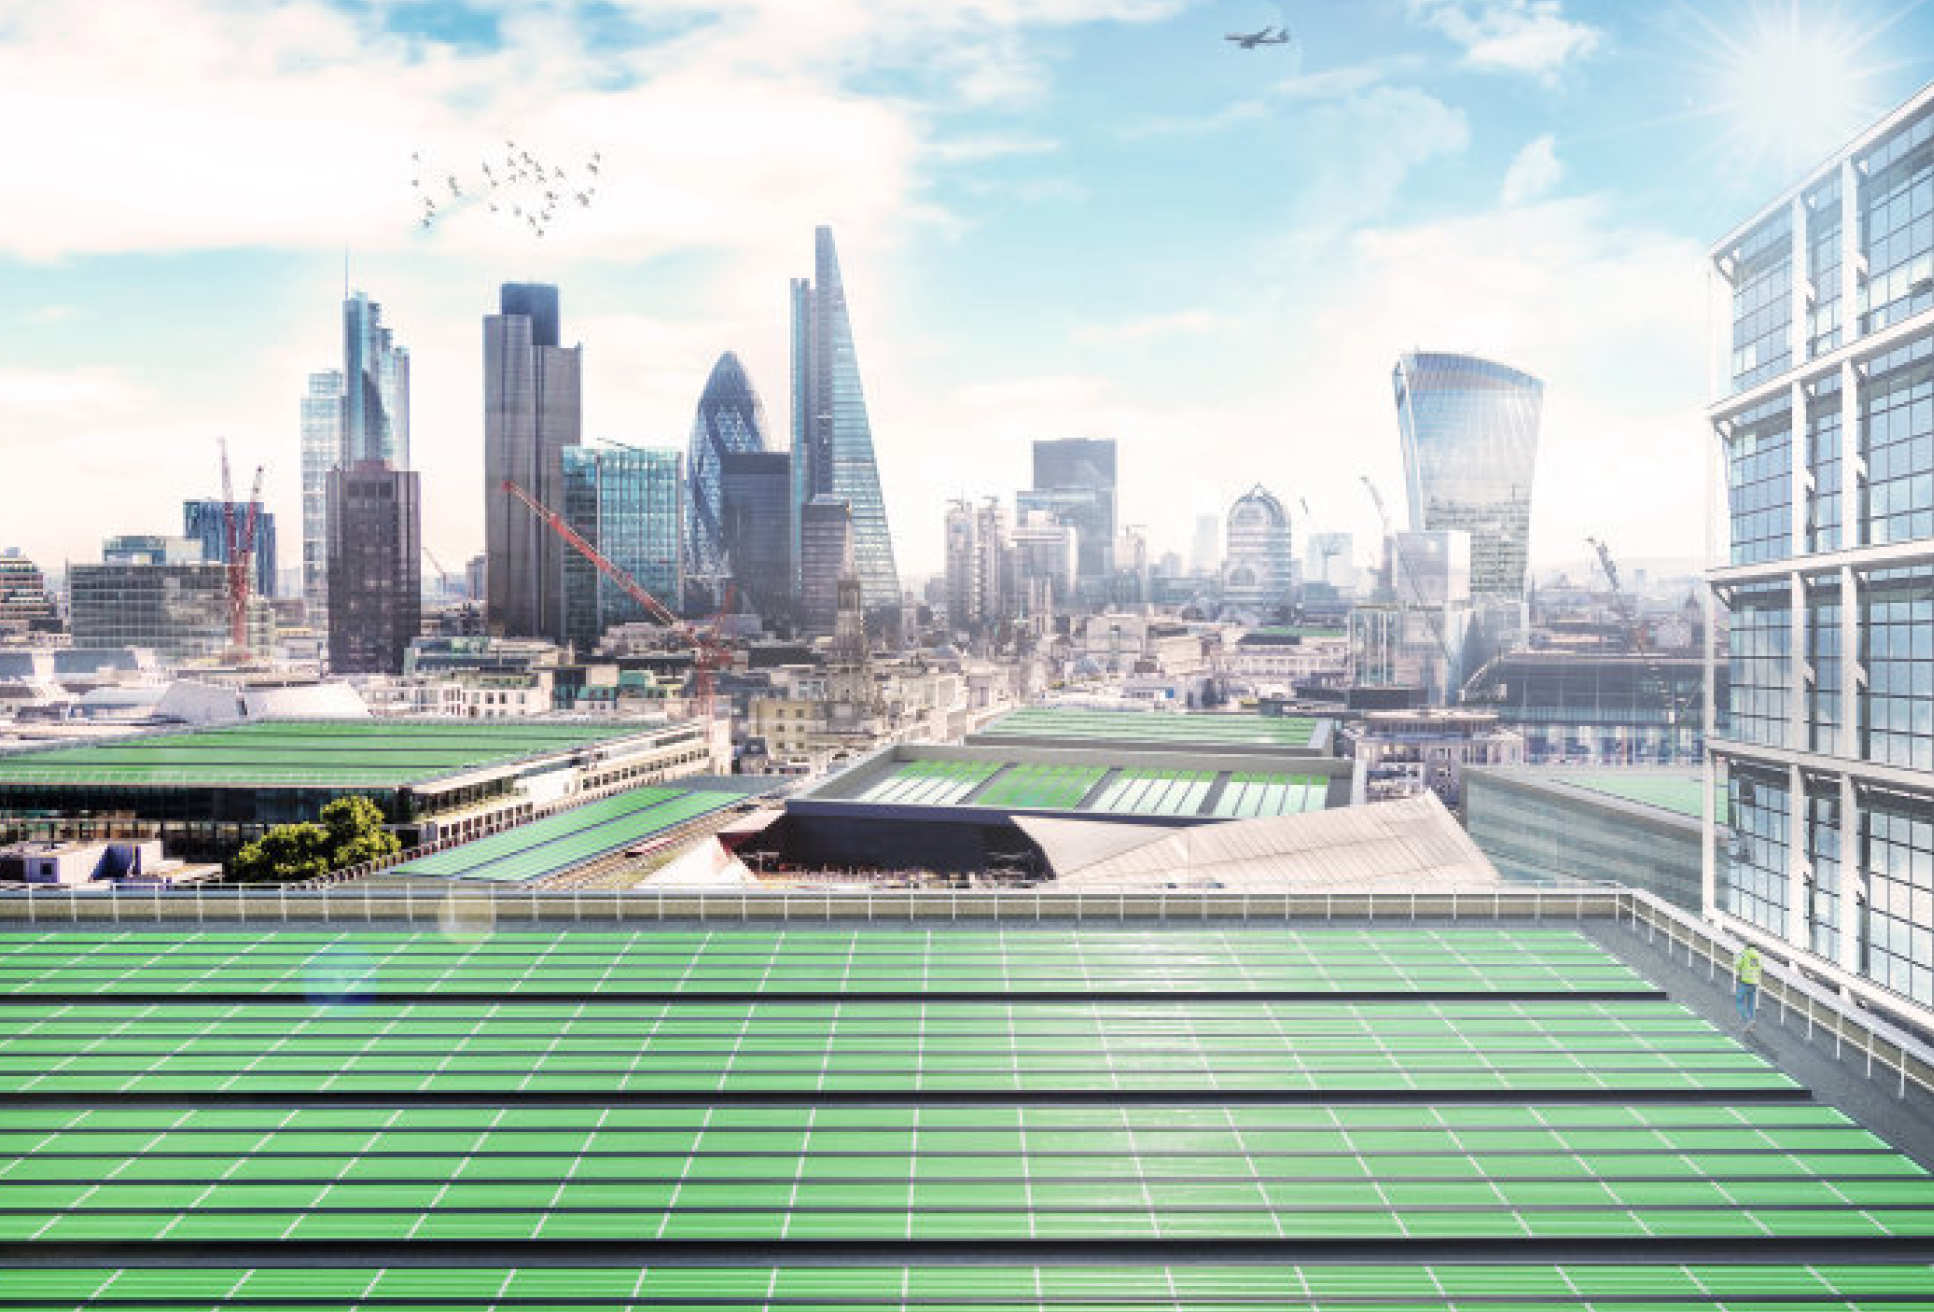 Artist's mockup of green bioleaf solar panels on top of a building in white city.